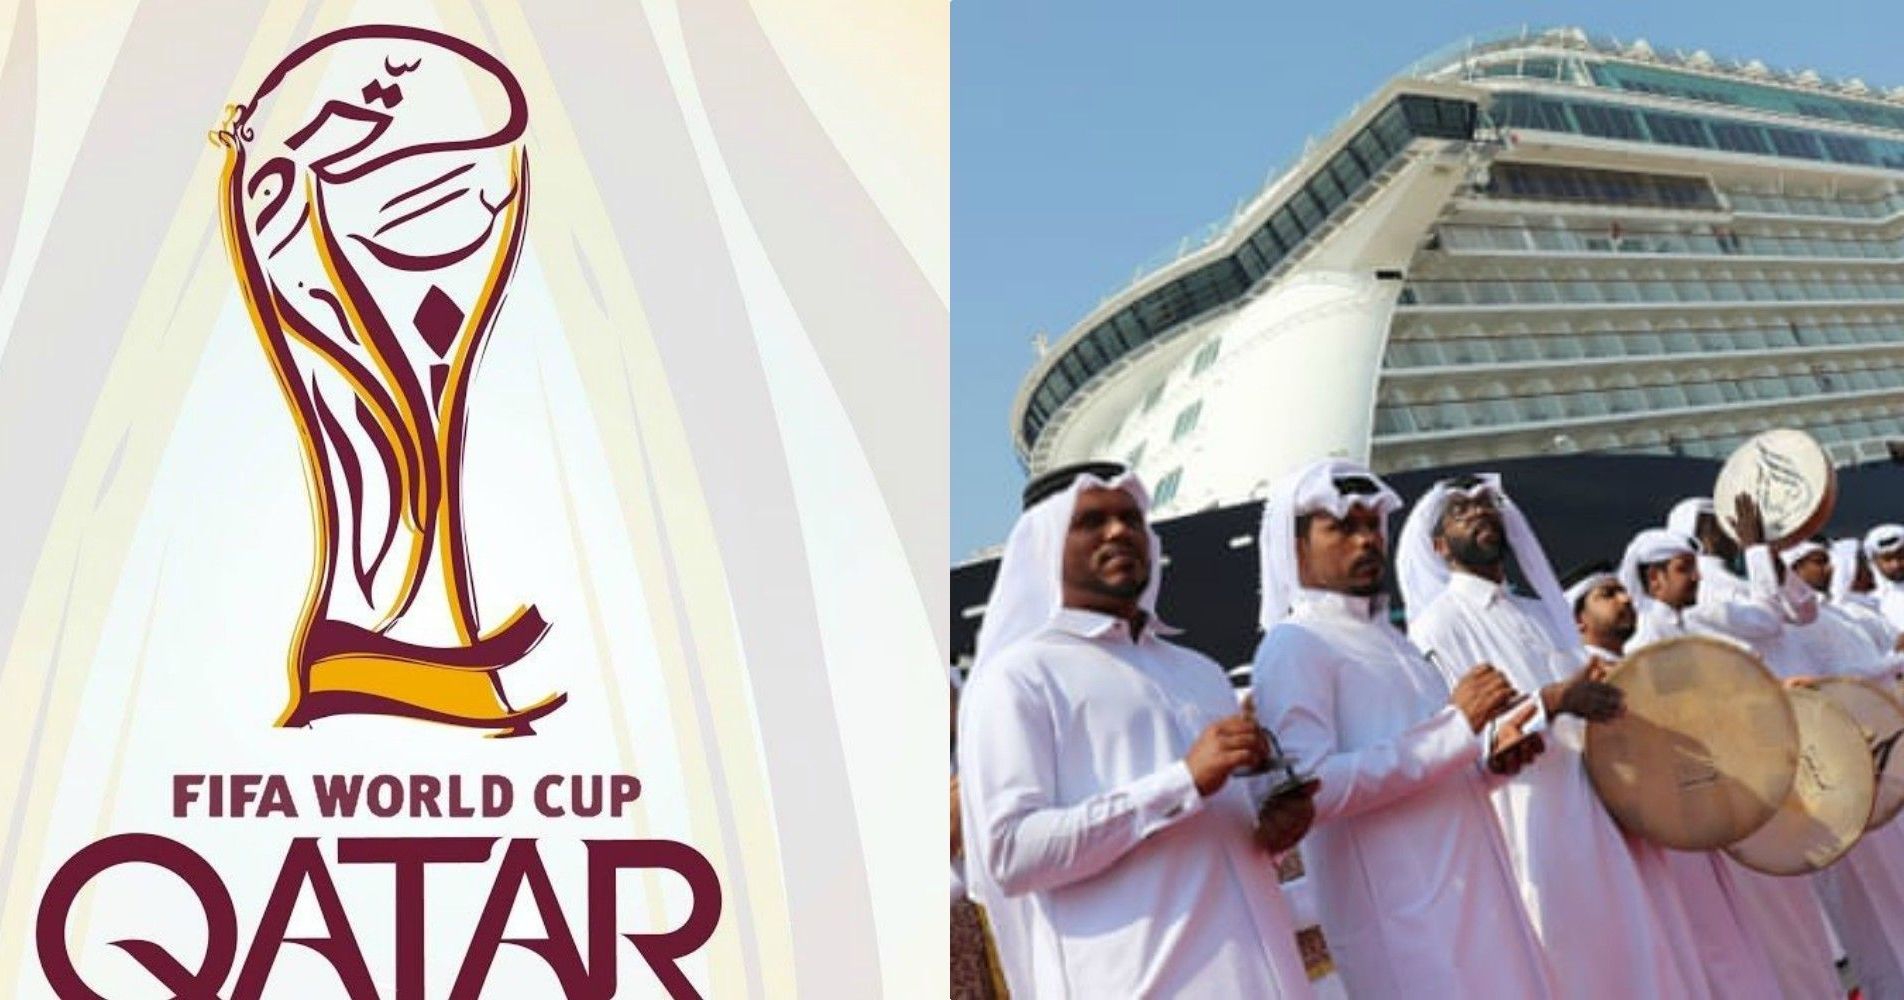 Many Fans Headed To Qatar For 2022 FIFA World Cup Will Get To Sleep On